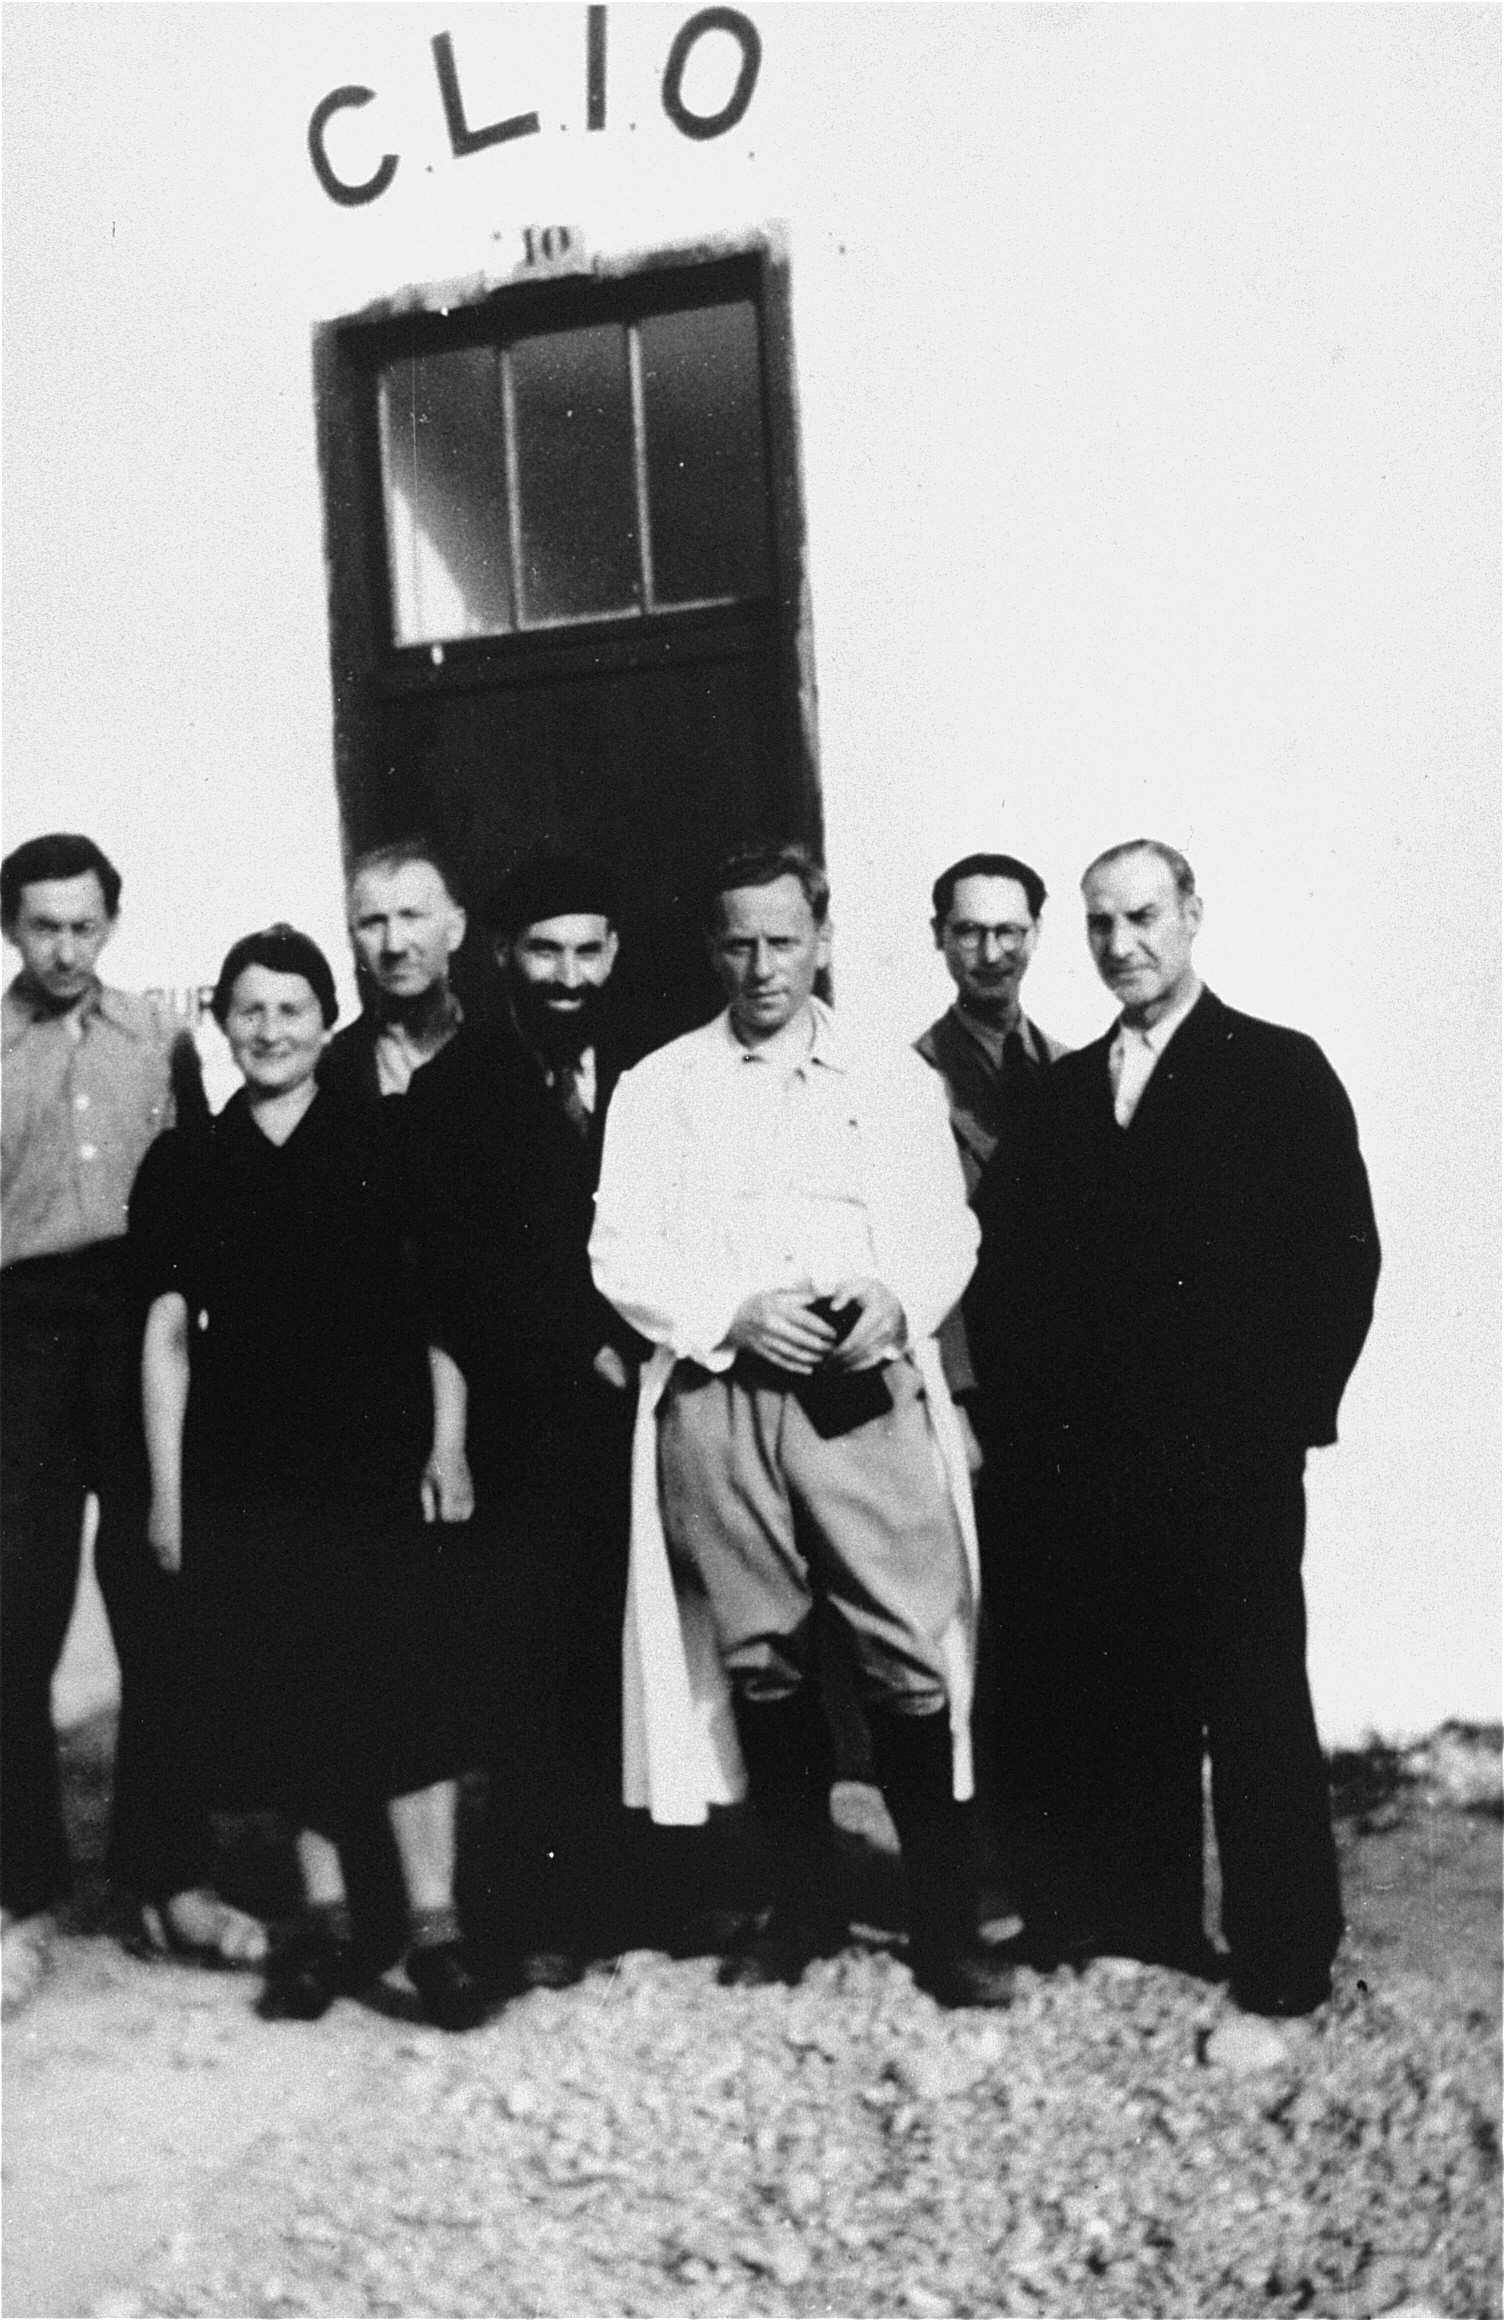 Members of CLIO (Le Comite d’liaison israelite du oeuvres), the Jewish liaison committee who helped implement the medical and social assistance programs of the OSE relief agency in the Rivesaltes transit camp